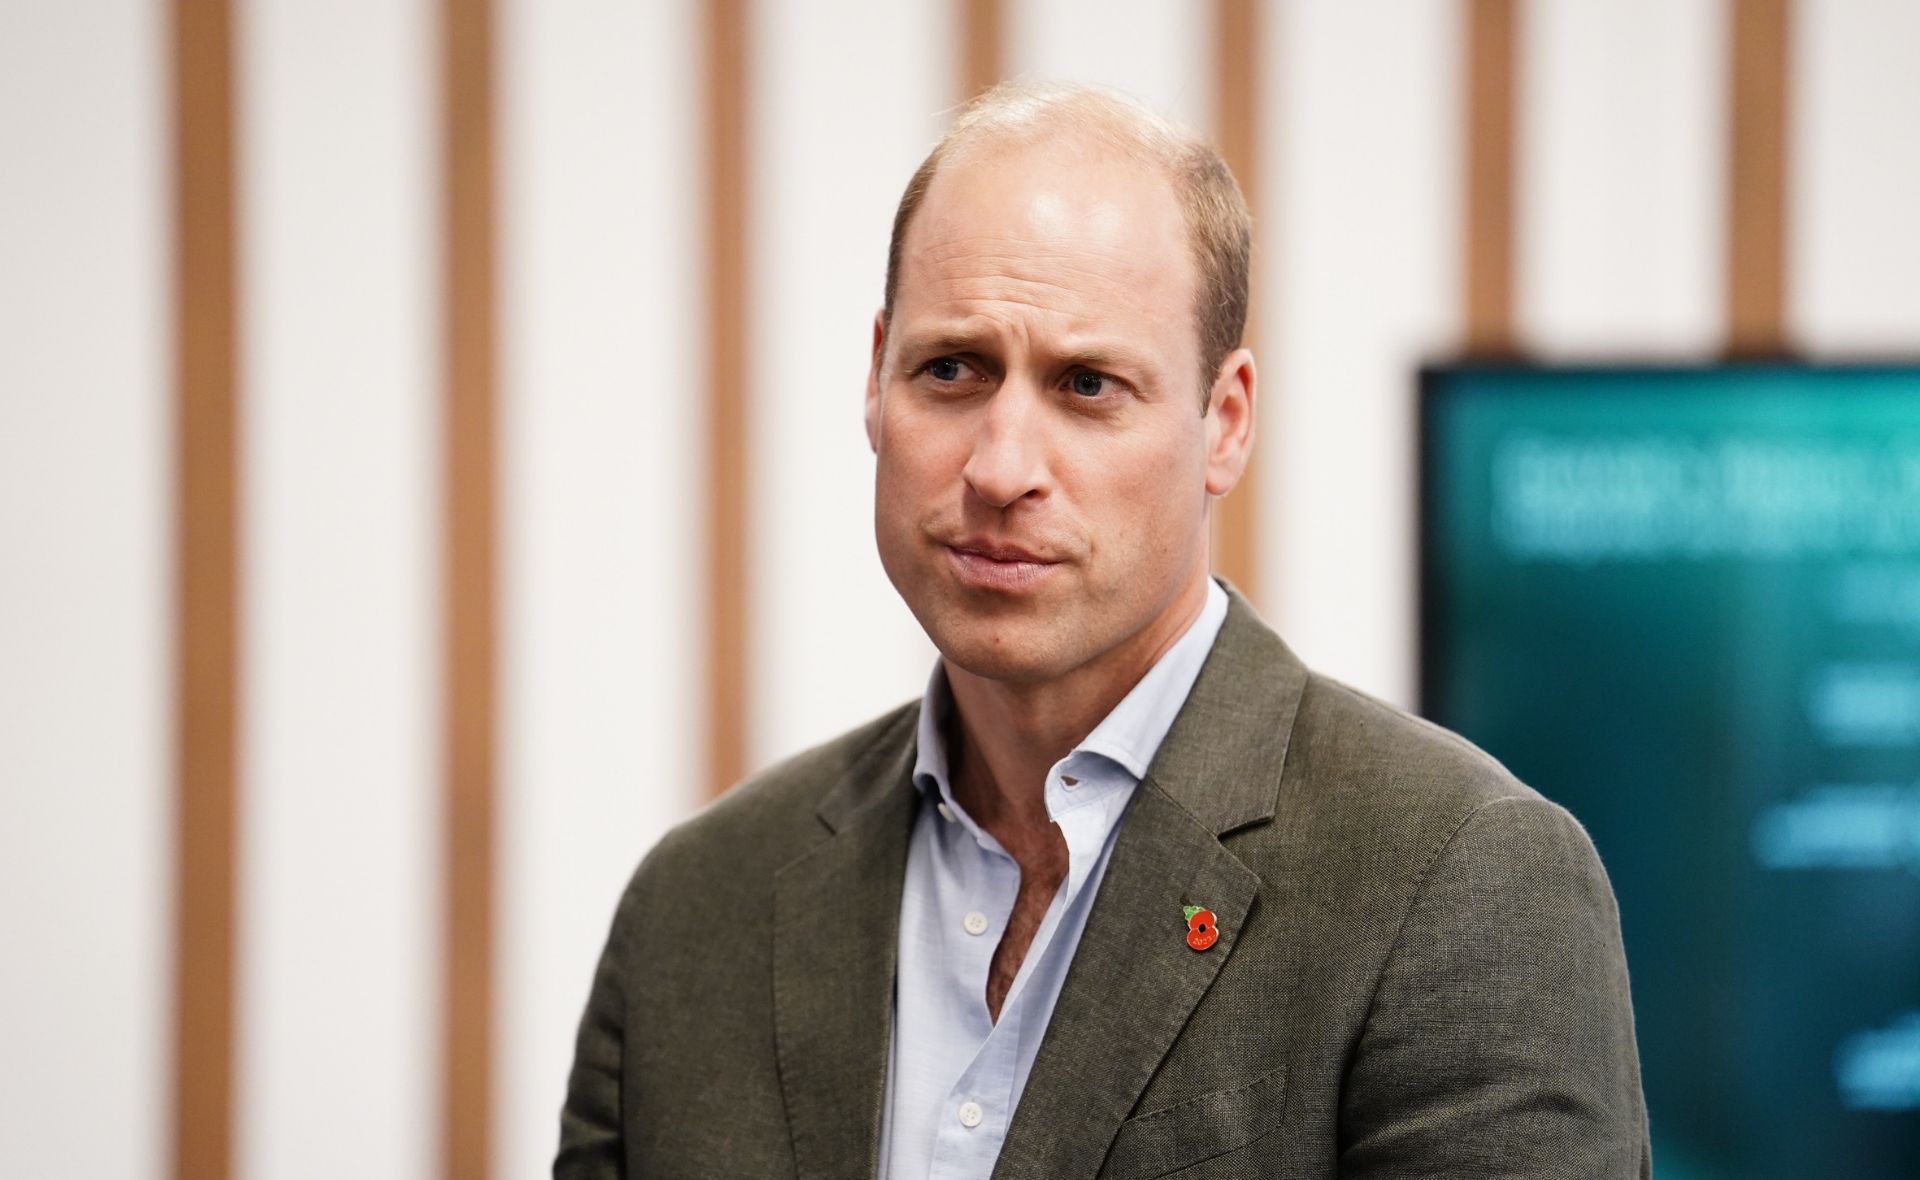 Prince William vows to “actually bring change” at Earthshot Prize awards ceremony